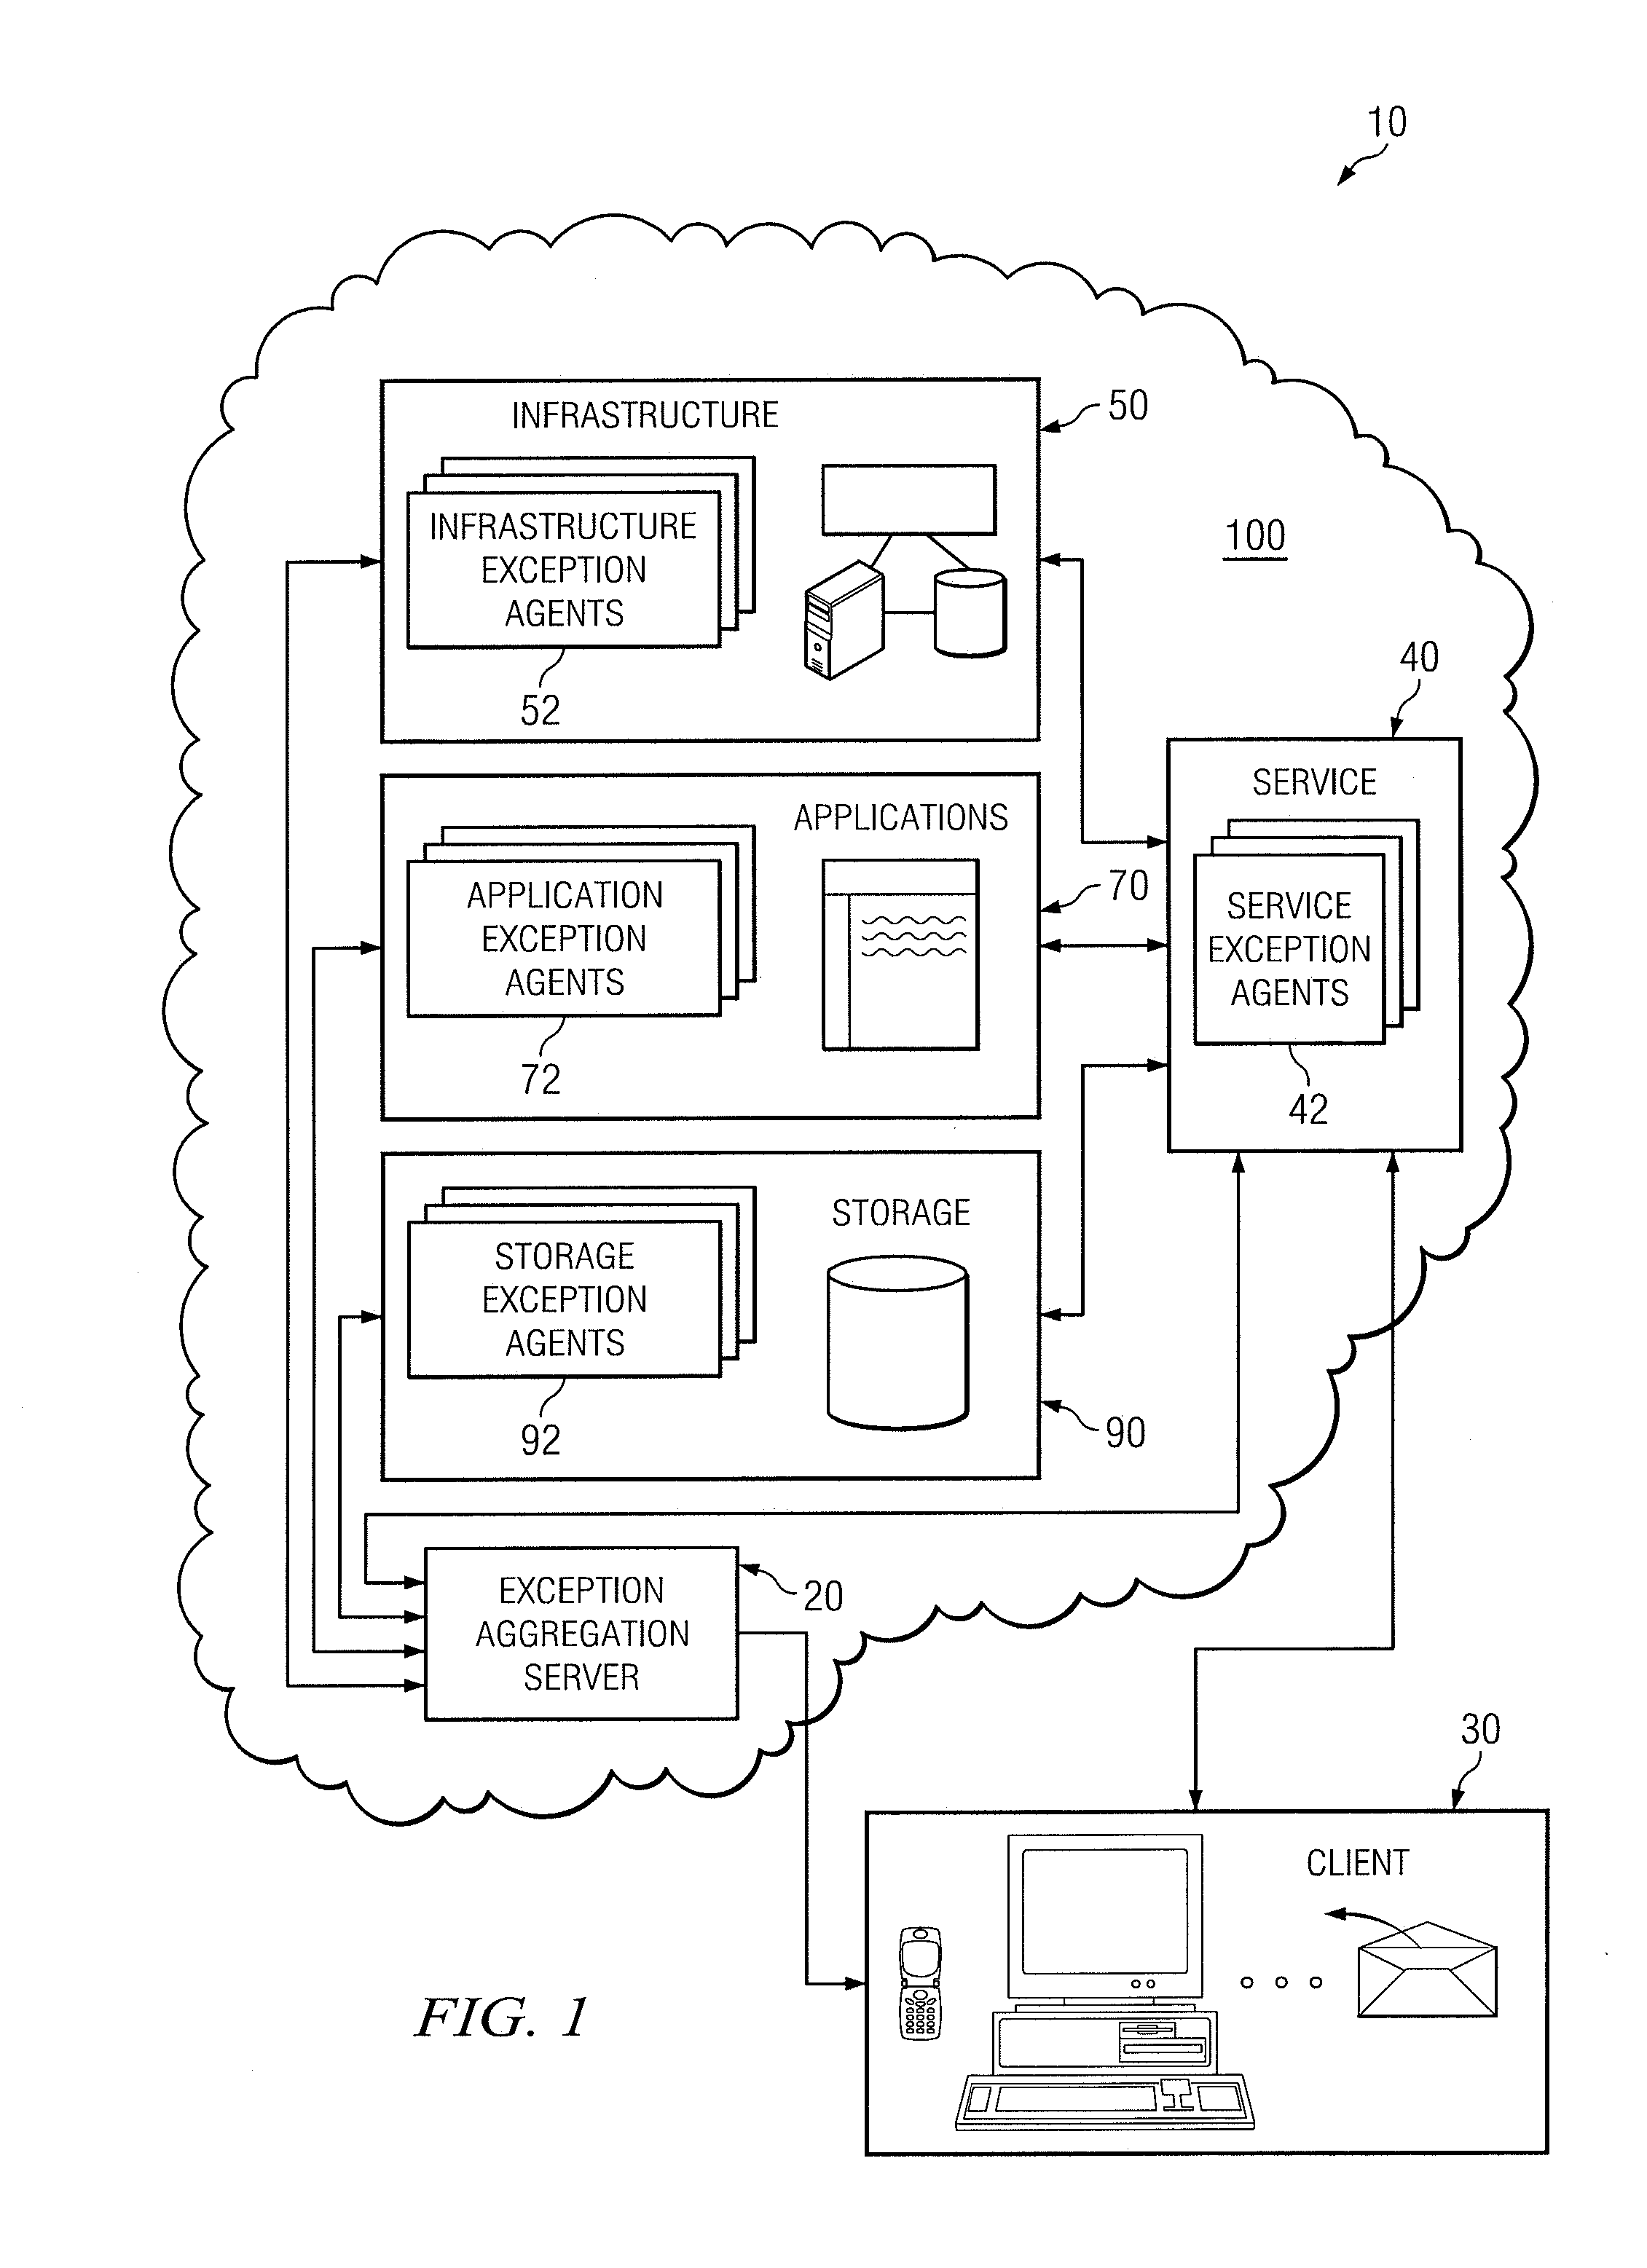 System and method of collecting and reporting exceptions associated with information technology services